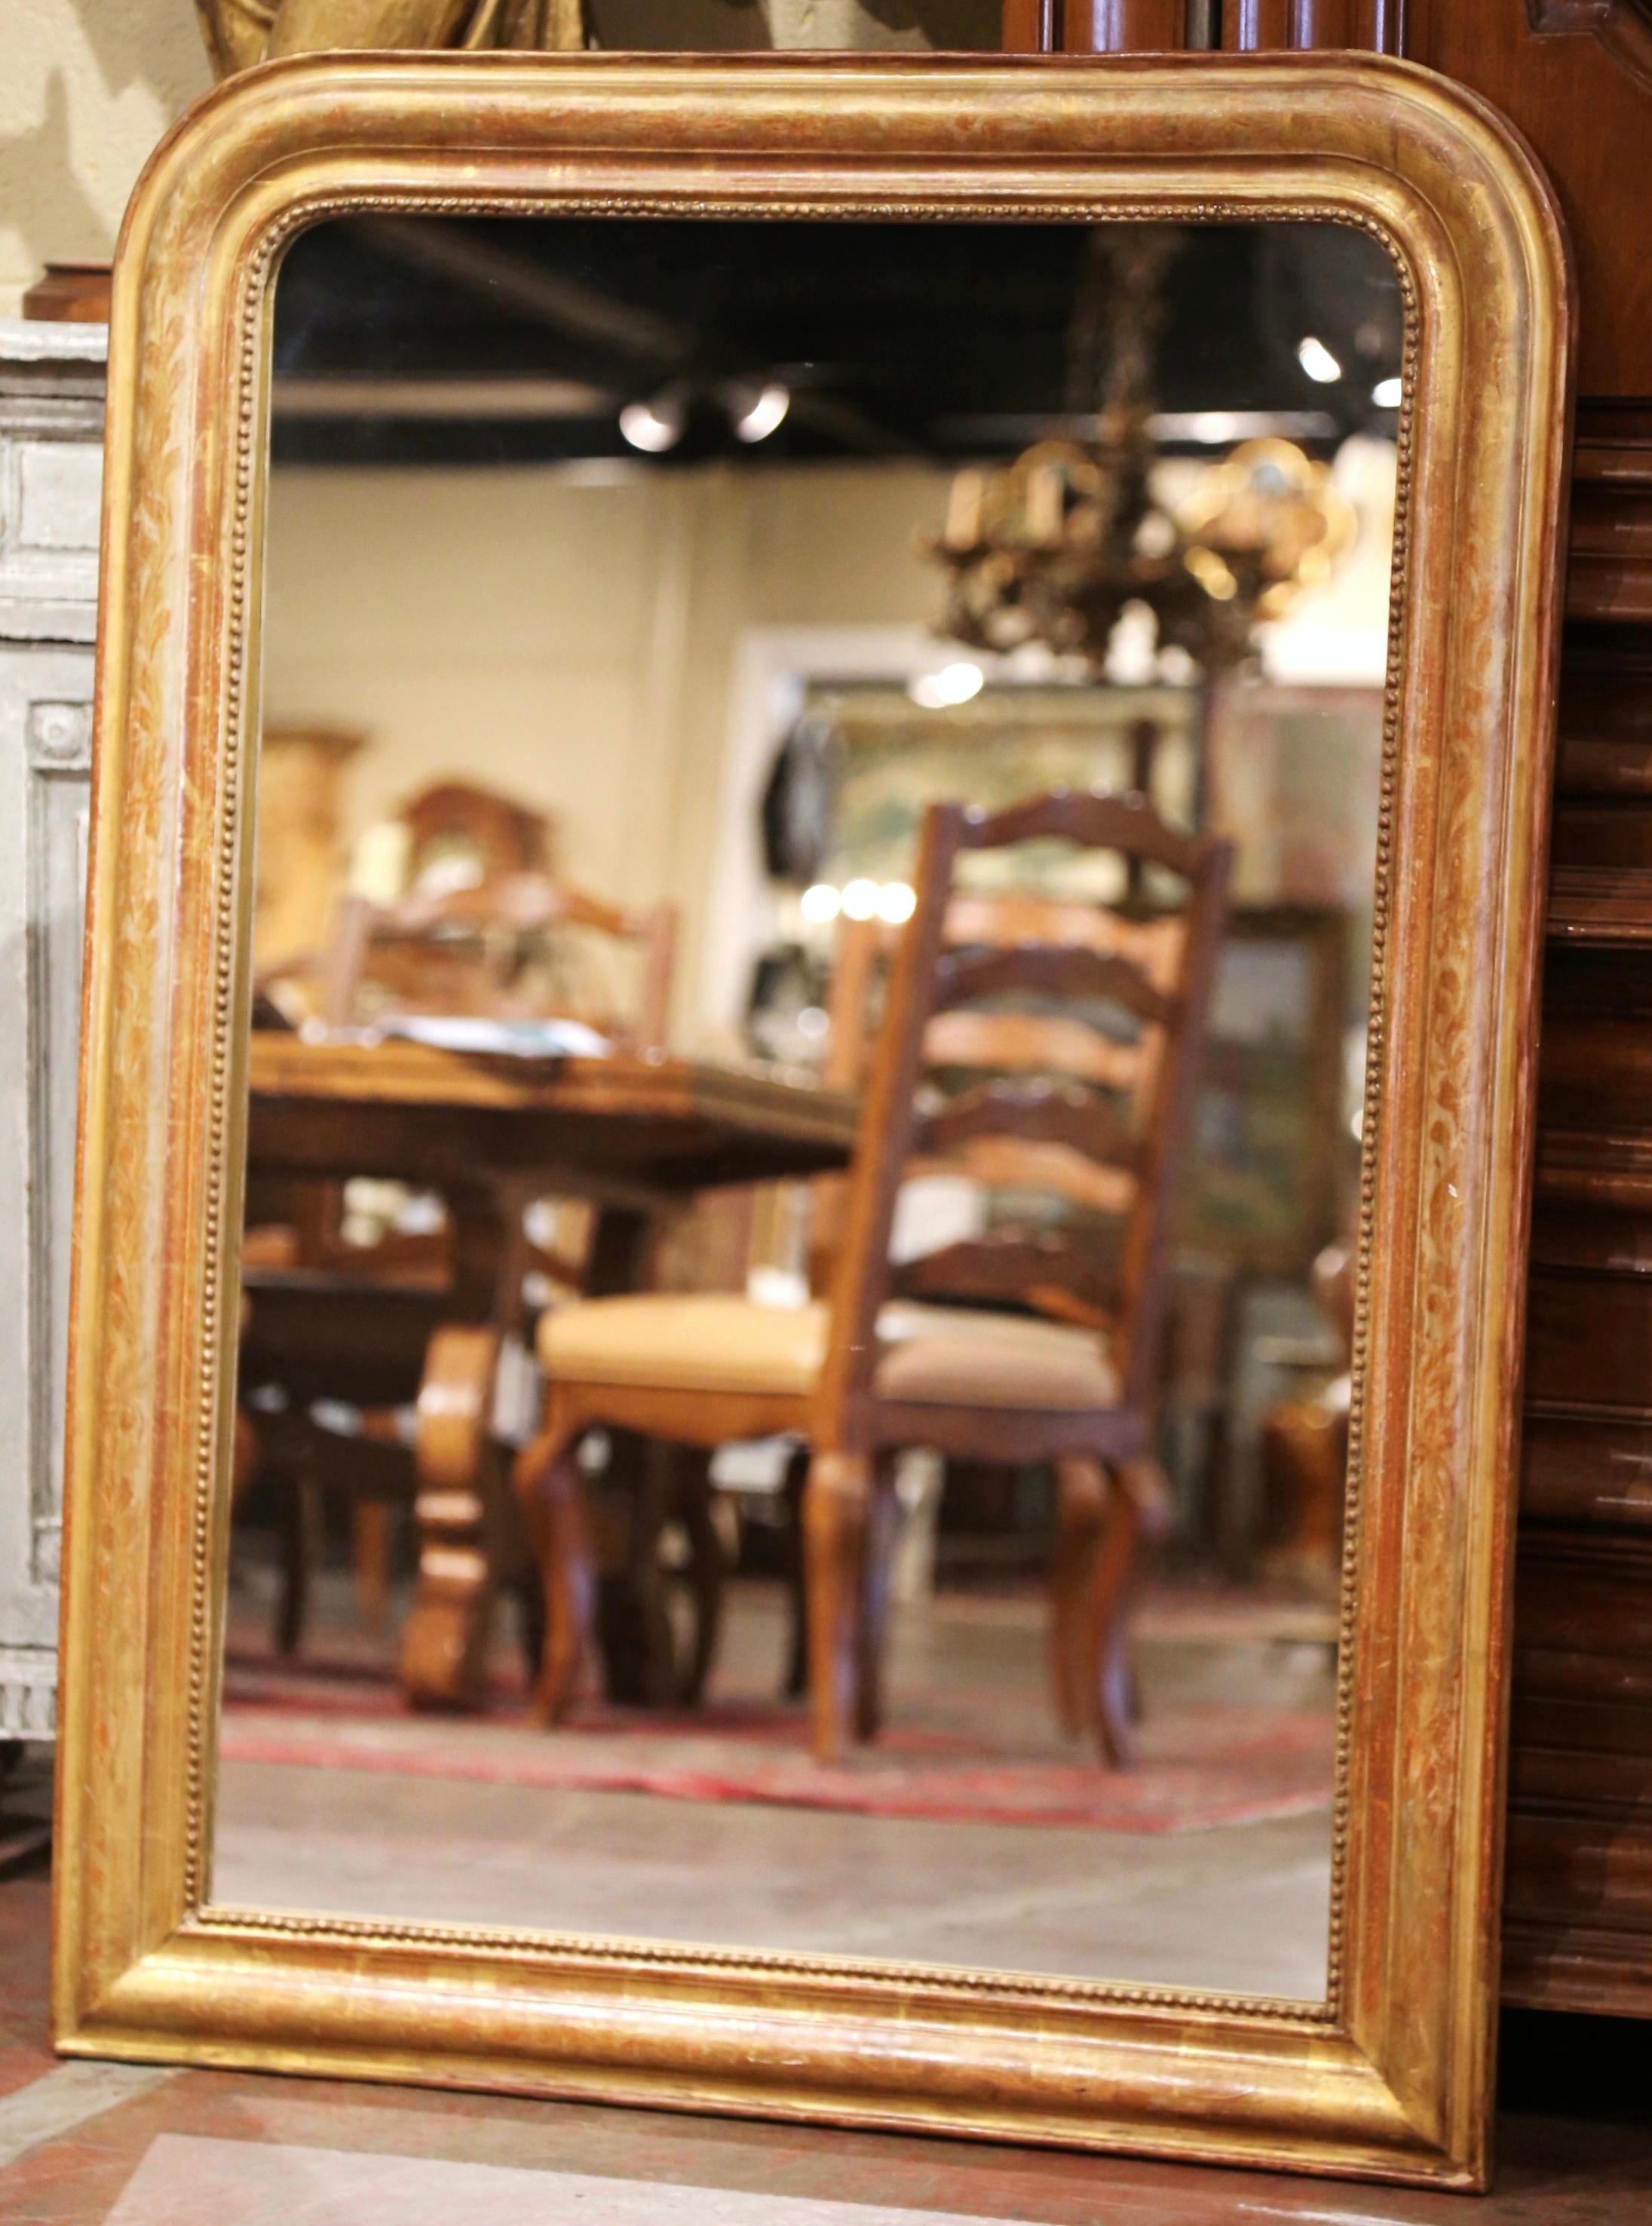 Crafted in the Burgundy region of France circa 1860, the large antique gilt mirror has traditional lines with rounded corners; the rectangular thick frame is decorated with a discrete engraved floral motif throughout and embellished with bead decor